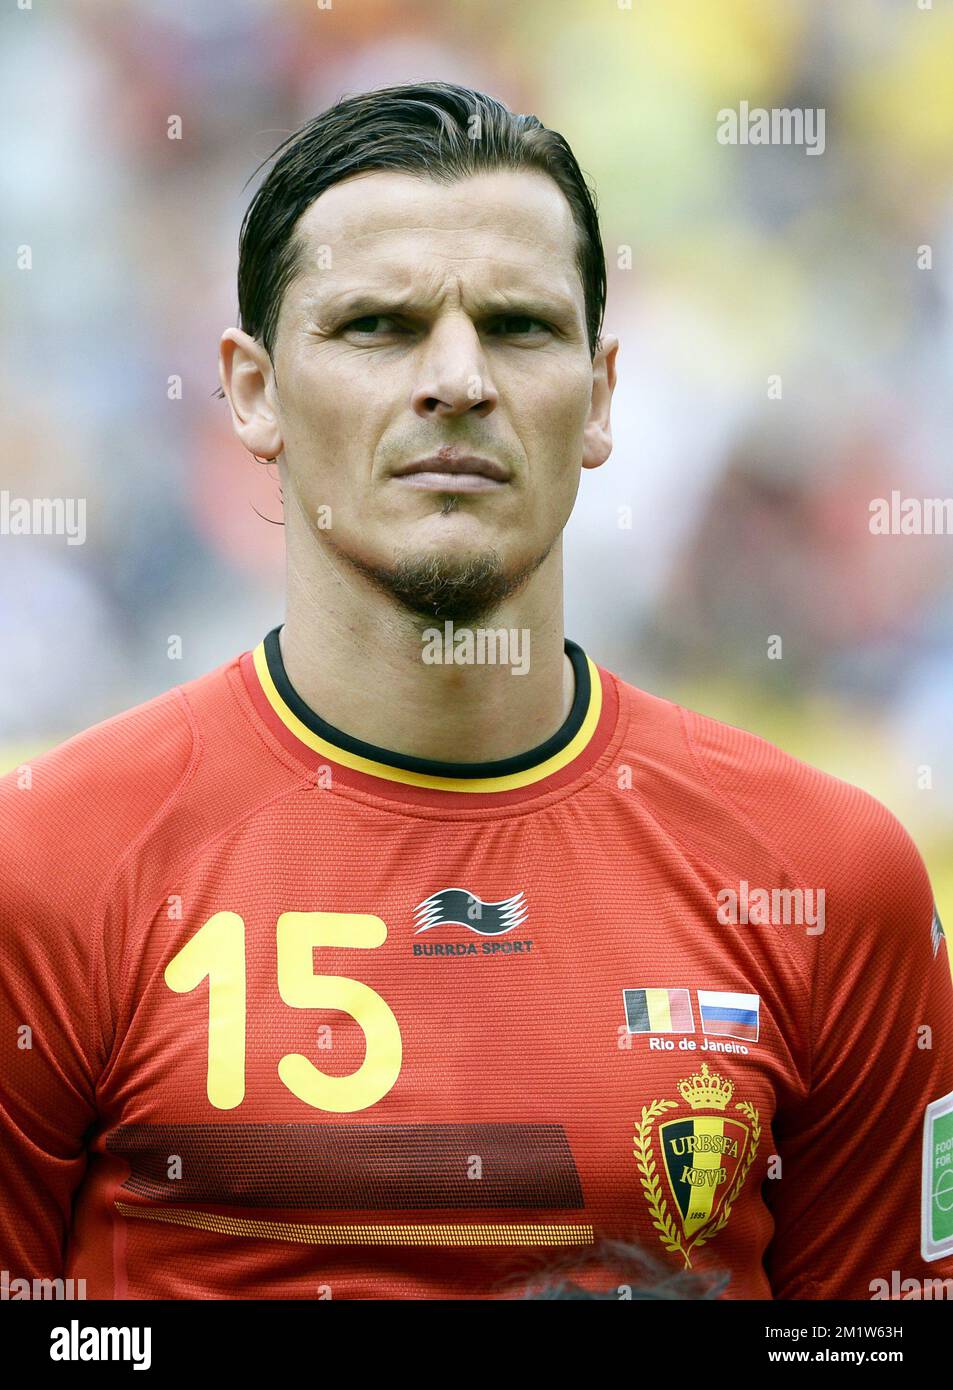 20140622 - RIO DE JANEIRO, BRAZIL: Belgium's Daniel Van Buyten pictured at the start of a soccer game between Belgian national team The Red Devils and Russia in Rio de Janeiro, Brazil, the second game in Group H of the first round of the 2014 FIFA World Cup, Sunday 22 June 2014.   BELGA PHOTO DIRK WAEM Stock Photo